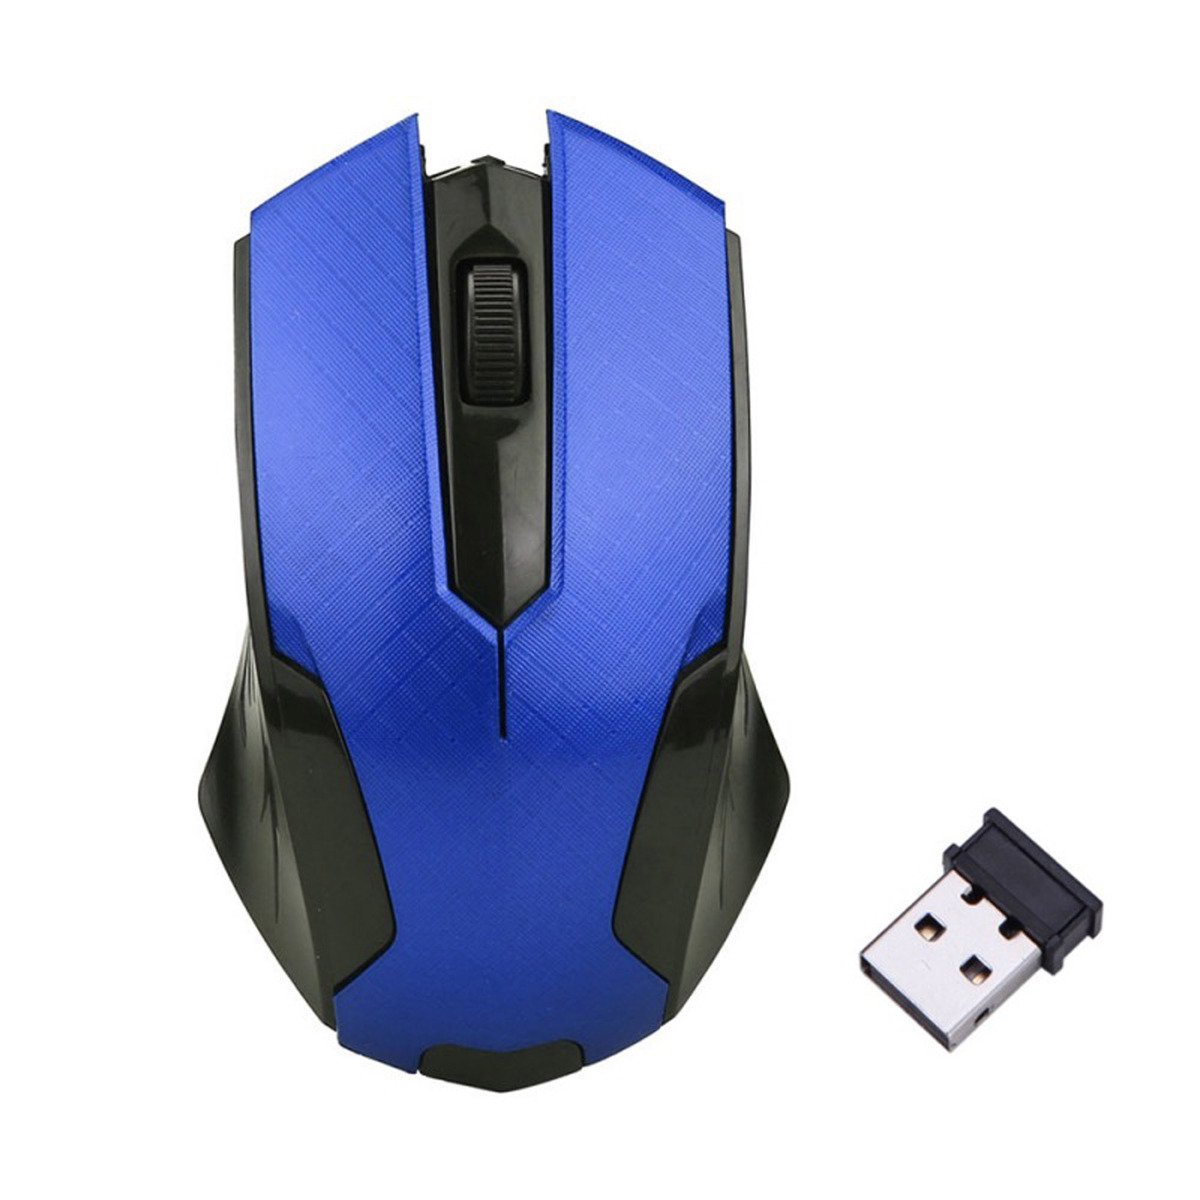 Iends Wireless 2400 DPI Optical USB Mouse with Nano Receiver MU989 (Assorted Colors)